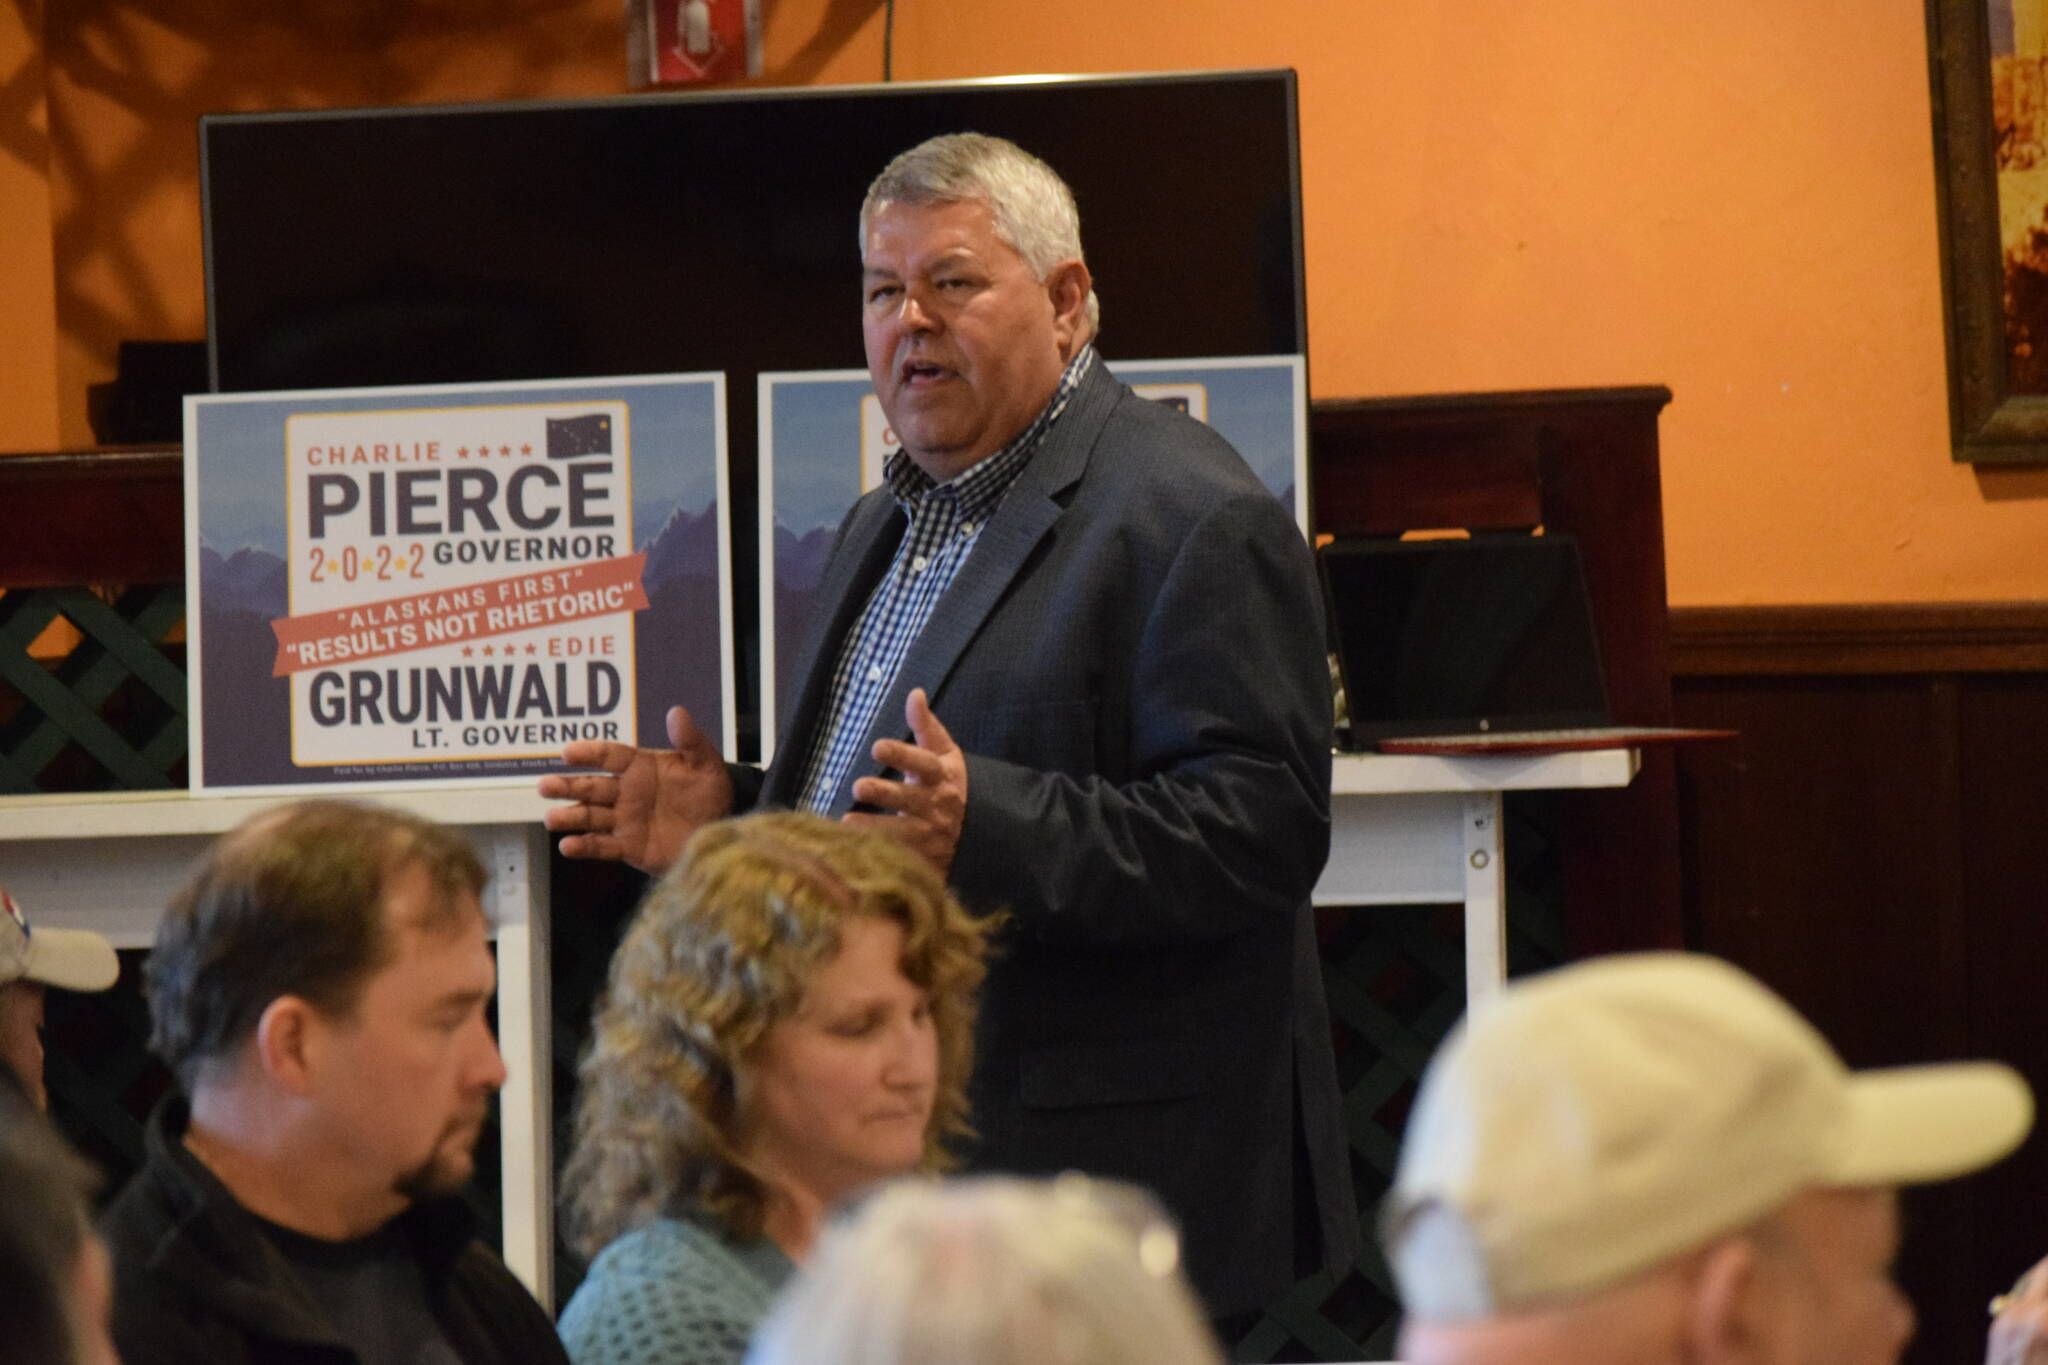 Alaska Gubernatorial candidate Charlie Pierce speaks at a campaign event at Paradisos restaurant in Kenai on Saturday, March 5, 2022. (Camille Botello/Peninsula Clarion)